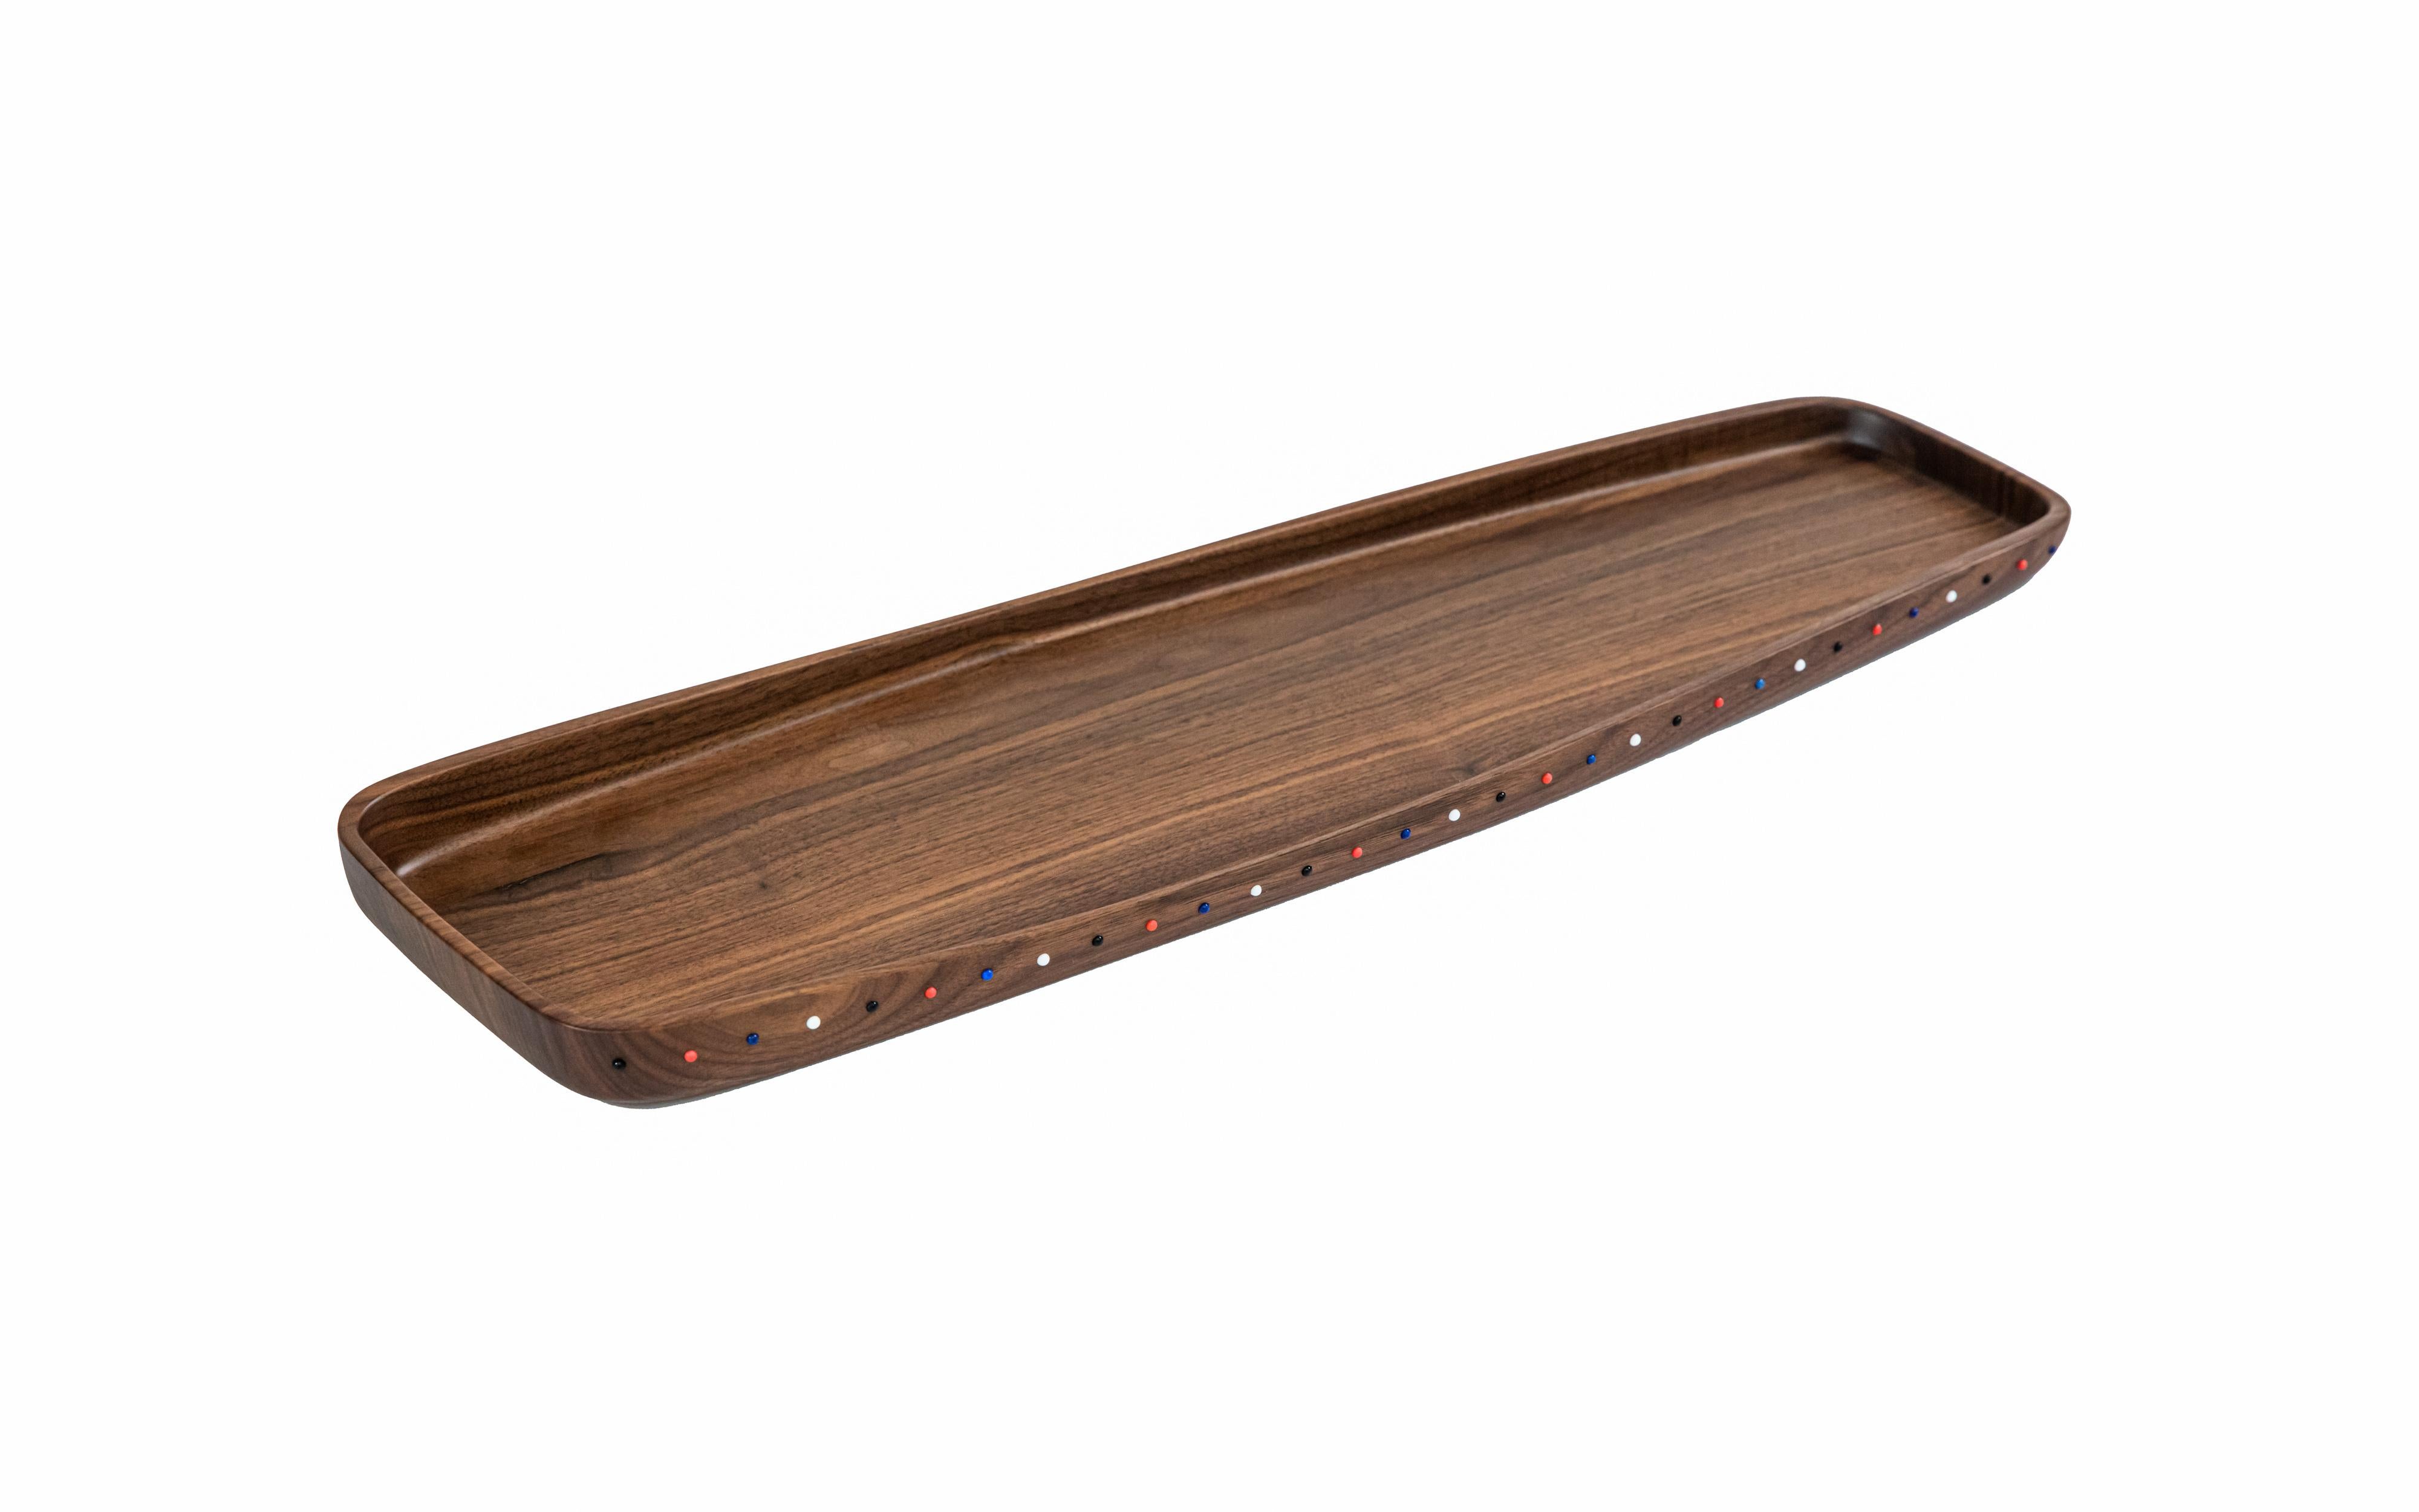 This organically shaped serving tray is carved from one solid piece of walnut wood and embedded with hand-placed glass pearl bead ornamentation. It can also be used as a platter or table centrepiece. 

The Pok collection celebrates the artistry of